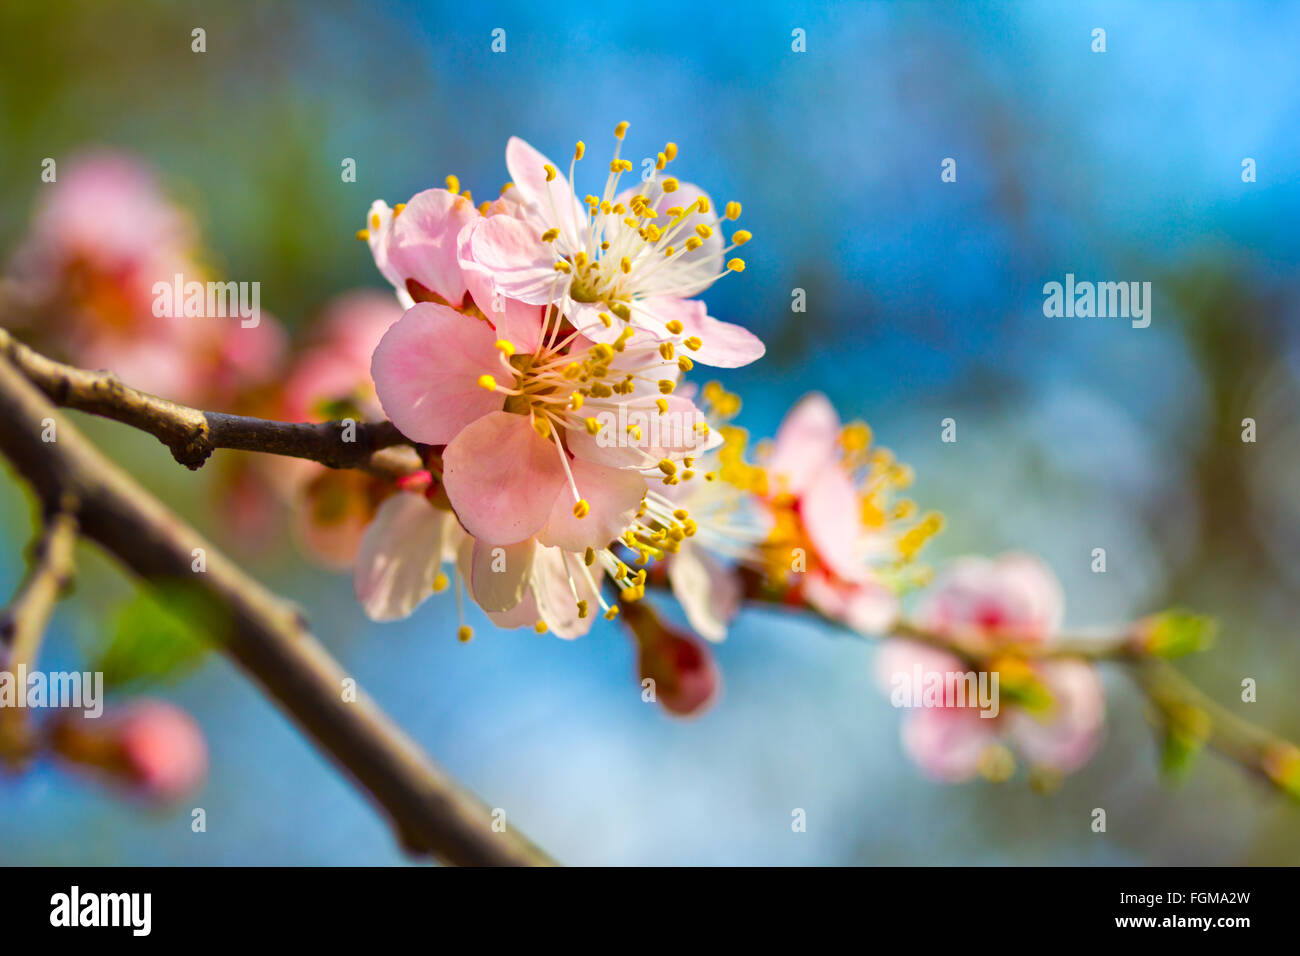 apple, blossom, nature, tree, spring, flower, pink, season, plant, in, beauty, branch, sky, garden, formal, white, blue, color, Stock Photo